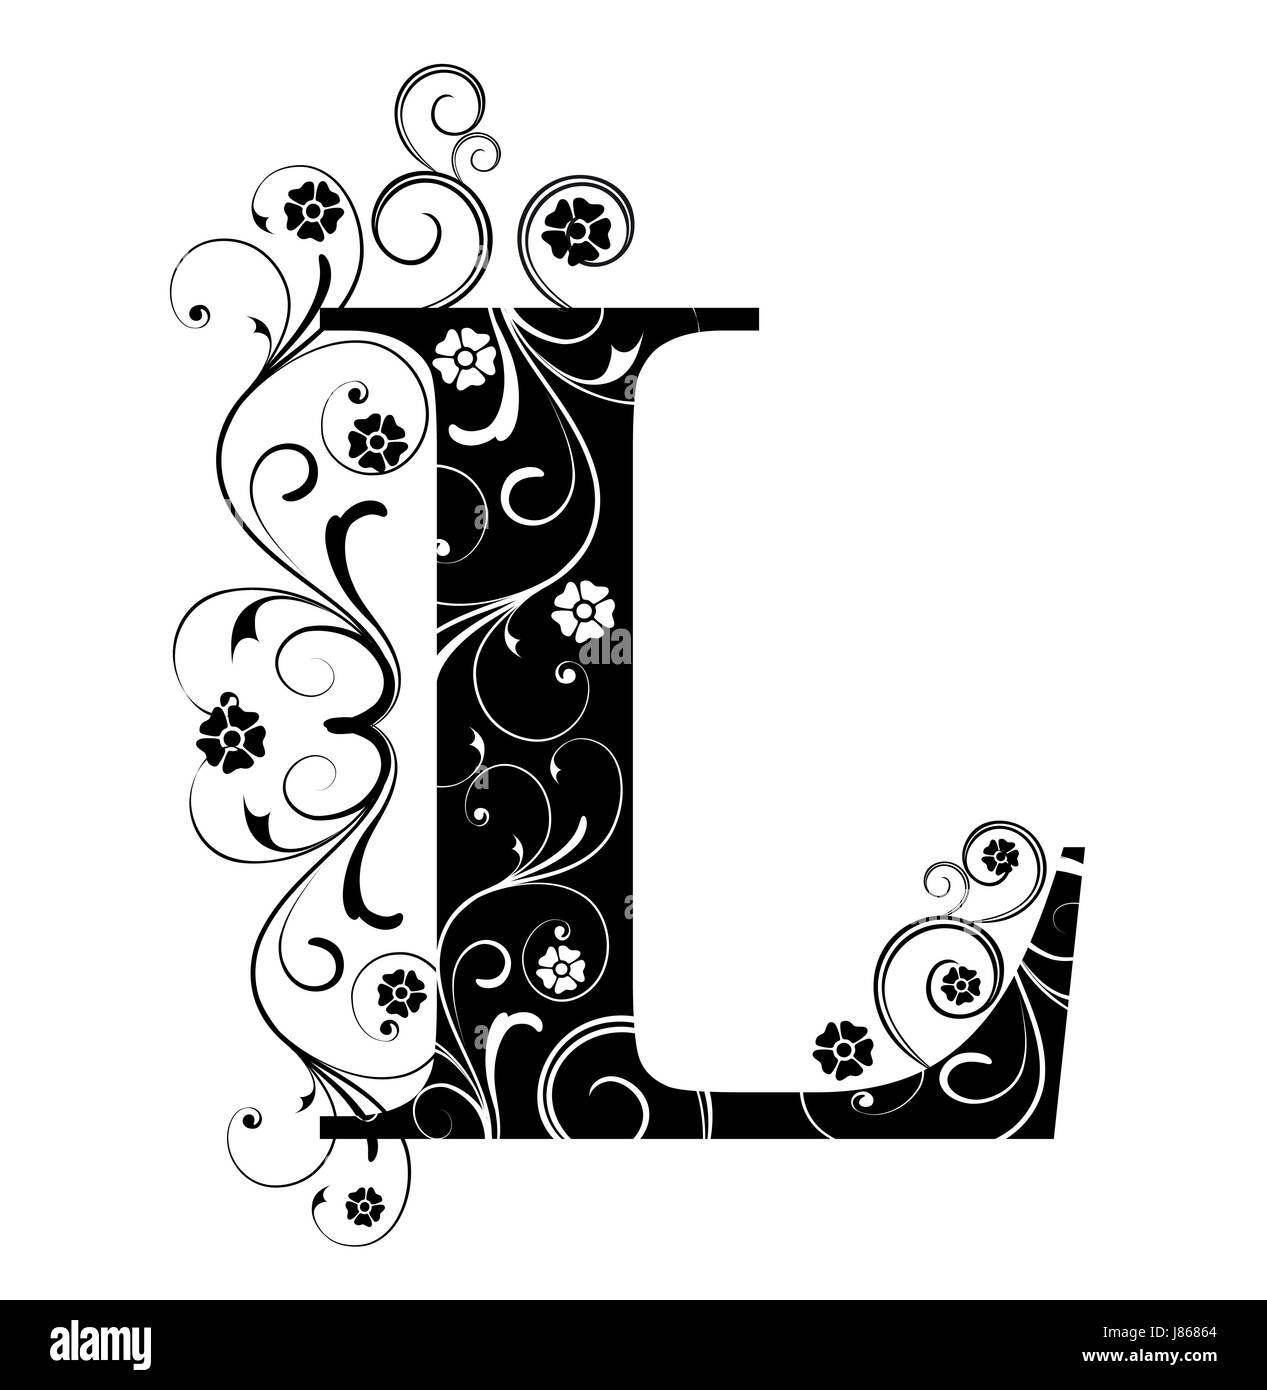 L letter Black and White Stock Photos & Images - Alamy